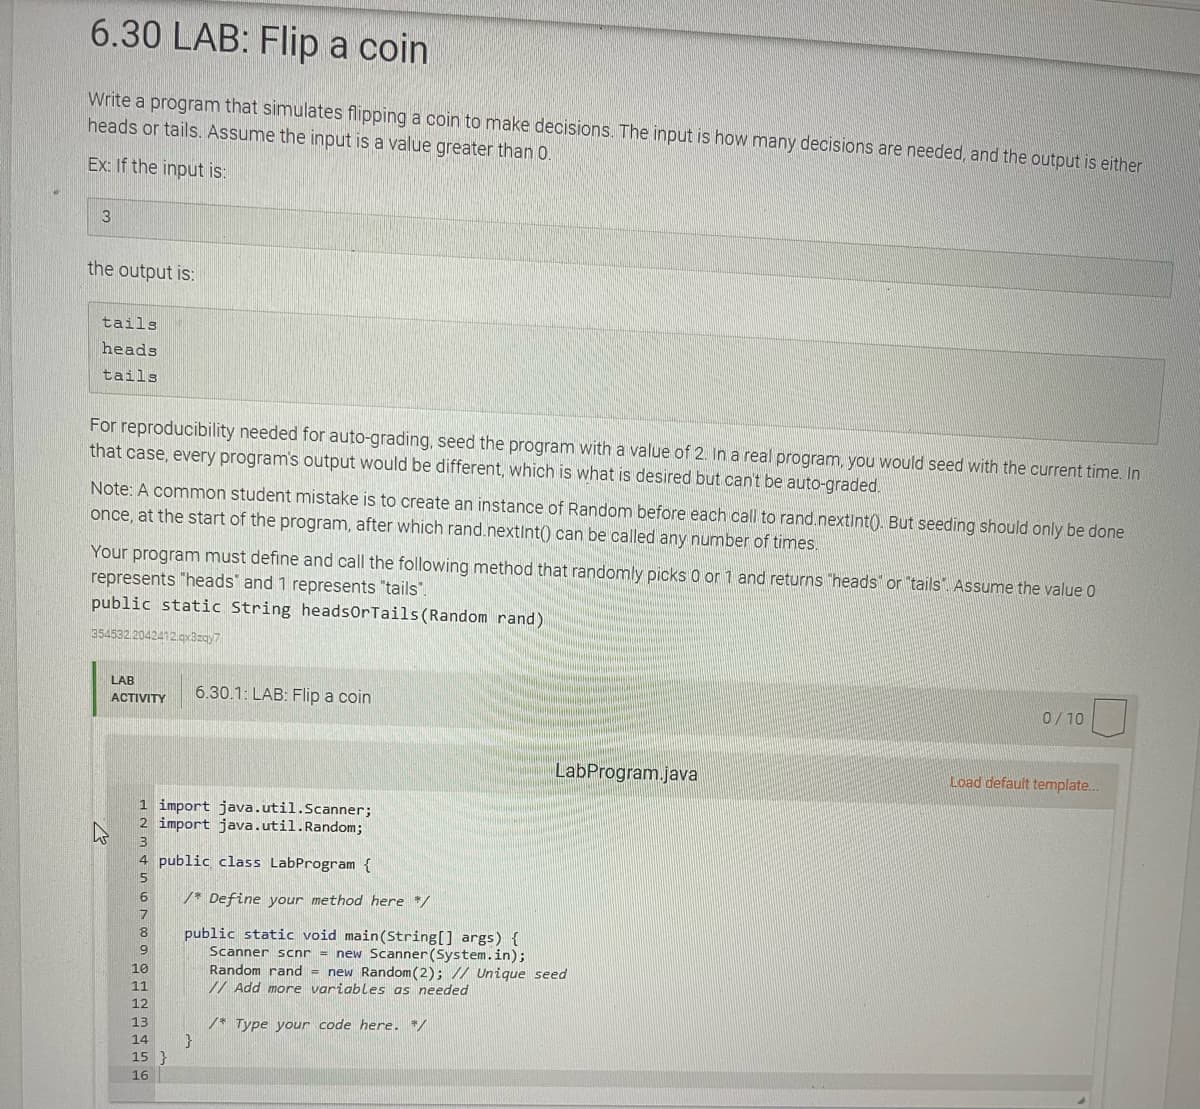 6.30 LAB: Flip a coin
Write a program that simulates flipping a coin to make decisions. The input is how many decisions are needed, and the output is either
heads or tails. Assume the input is a value greater than 0.
Ex: If the input is:
3
the output is:
tails
heads
tails
For reproducibility needed for auto-grading, seed the program with a value of 2. In a real program, you would seed with the current time. In
that case, every program's output would be different, which is what is desired but can't be auto-graded.
Note: A common student mistake is to create an instance of Random before each call to rand.nextint(). But seeding should only be done
once, at the start of the program, after which rand.nextint() can be called any number of times.
Your program must define and call the following method that randomly picks 0 or 1 and returns "heads" or "tails". Assume the value 0
represents "heads' and 1 represents "tails".
public static String headsOrTails(Random rand)
354532 2042412.gx3zay7
LAB
6.30.1: LAB: Flip a coin
0/10
ACTIVITY
LabProgram.java
Load default template.
1 import java.util.Scanner;
2 import java.util.Random;
4 public class LabProgram {
5
/* Define your method here */
7
public static void main(String[] args) {
Scanner scnr = new Scanner (System.in);
Random rand = new Random(2); // Unique seed
/ Add more variables as needed
8.
9.
10
11
12
13
/* Type your code here. */
14
15 }
16
